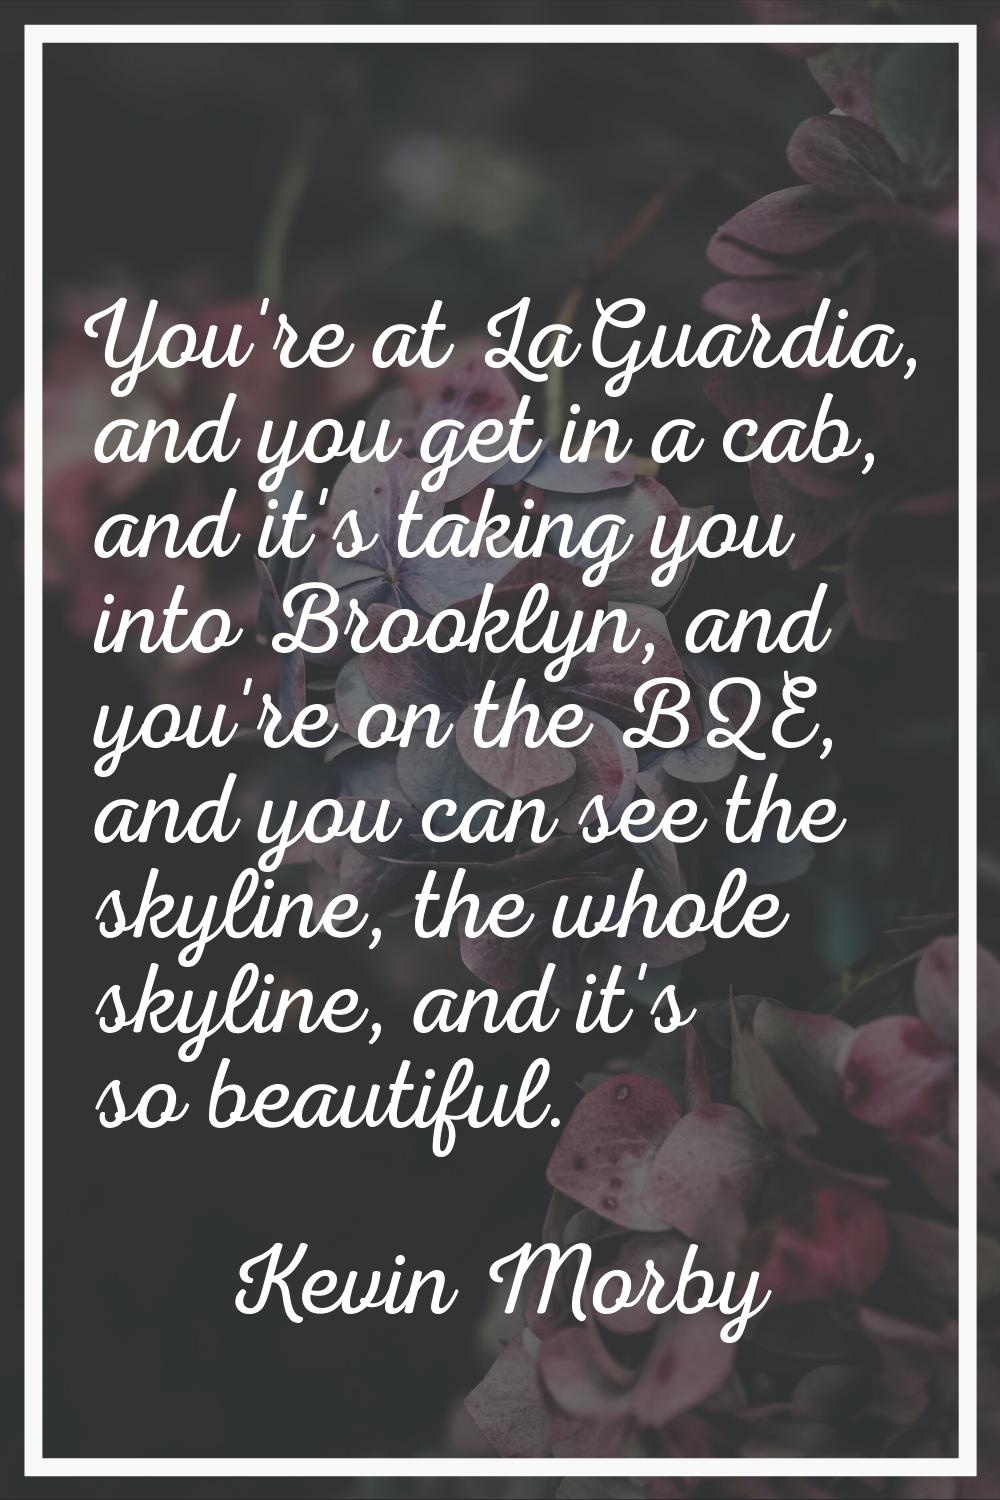 You're at LaGuardia, and you get in a cab, and it's taking you into Brooklyn, and you're on the BQE